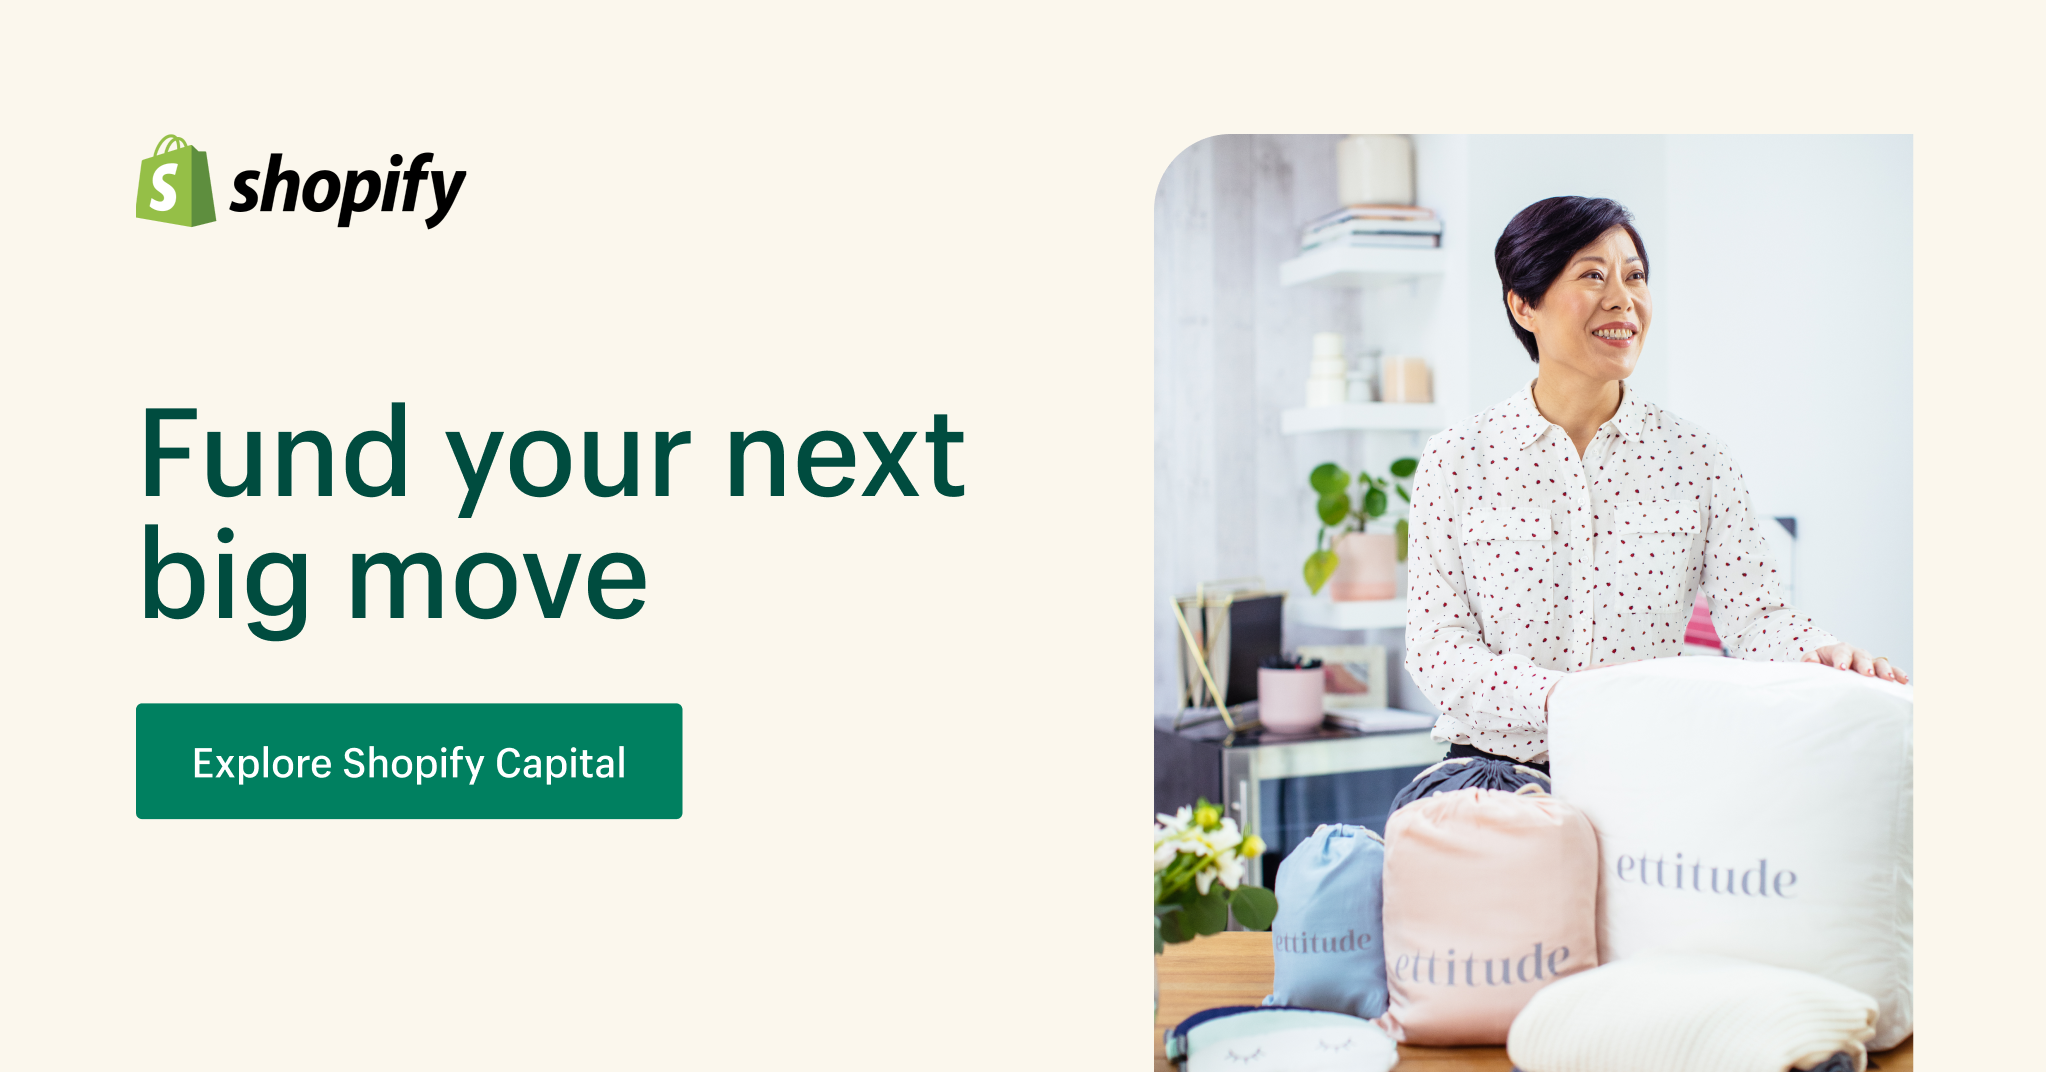 Ad for Shopify Capital. The text reads: "Fund your next big move." A call-to-action button reads: "Explore Shopify Capital." A photo of an Asian woman smiling appears to the right of the text